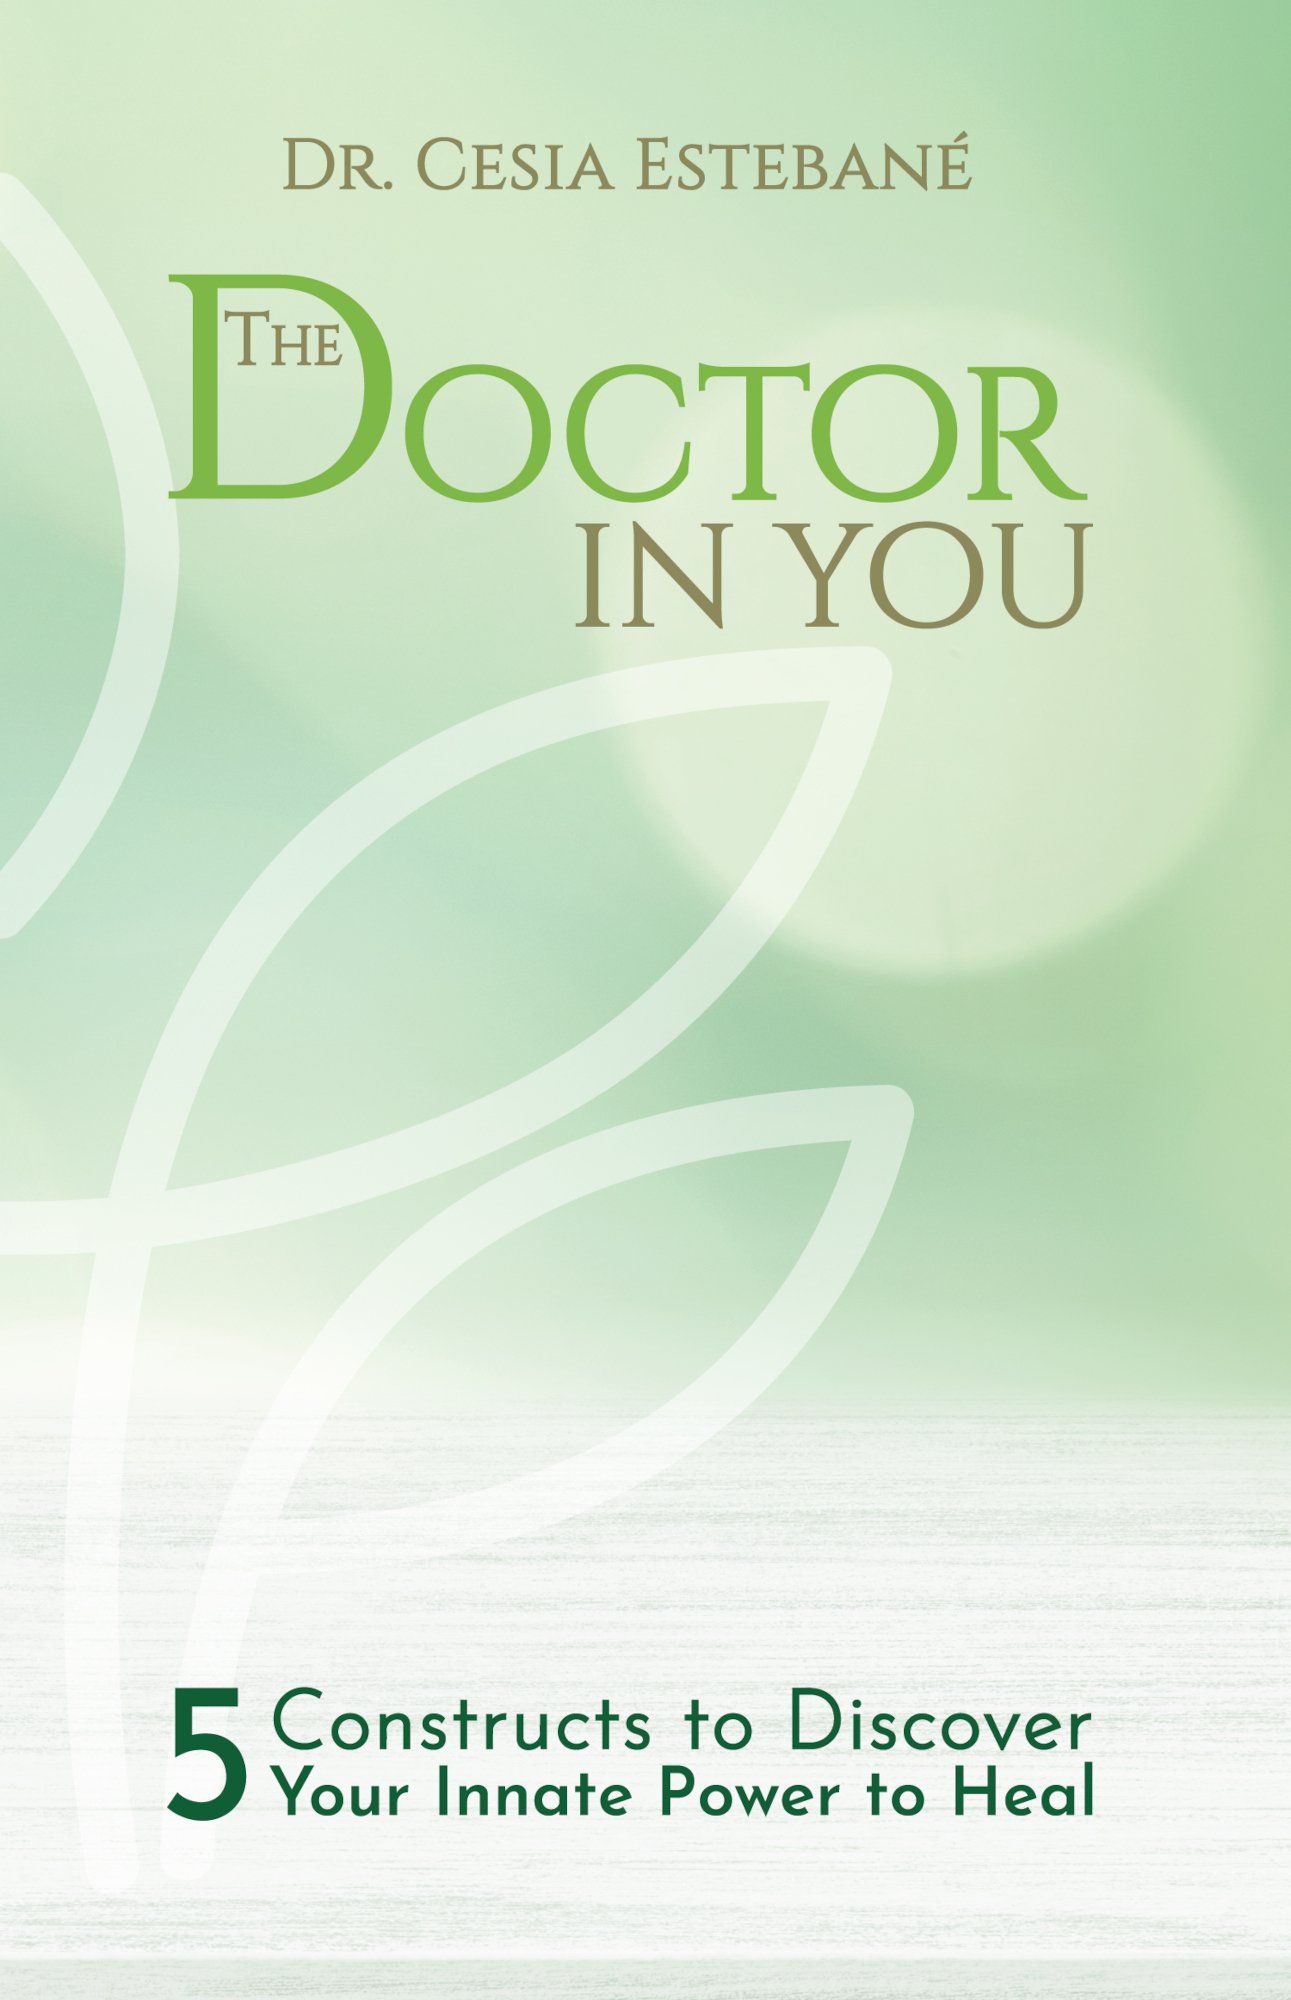 The Doctor in You: 5 Constructs to Discover Your Innate Power to Heal